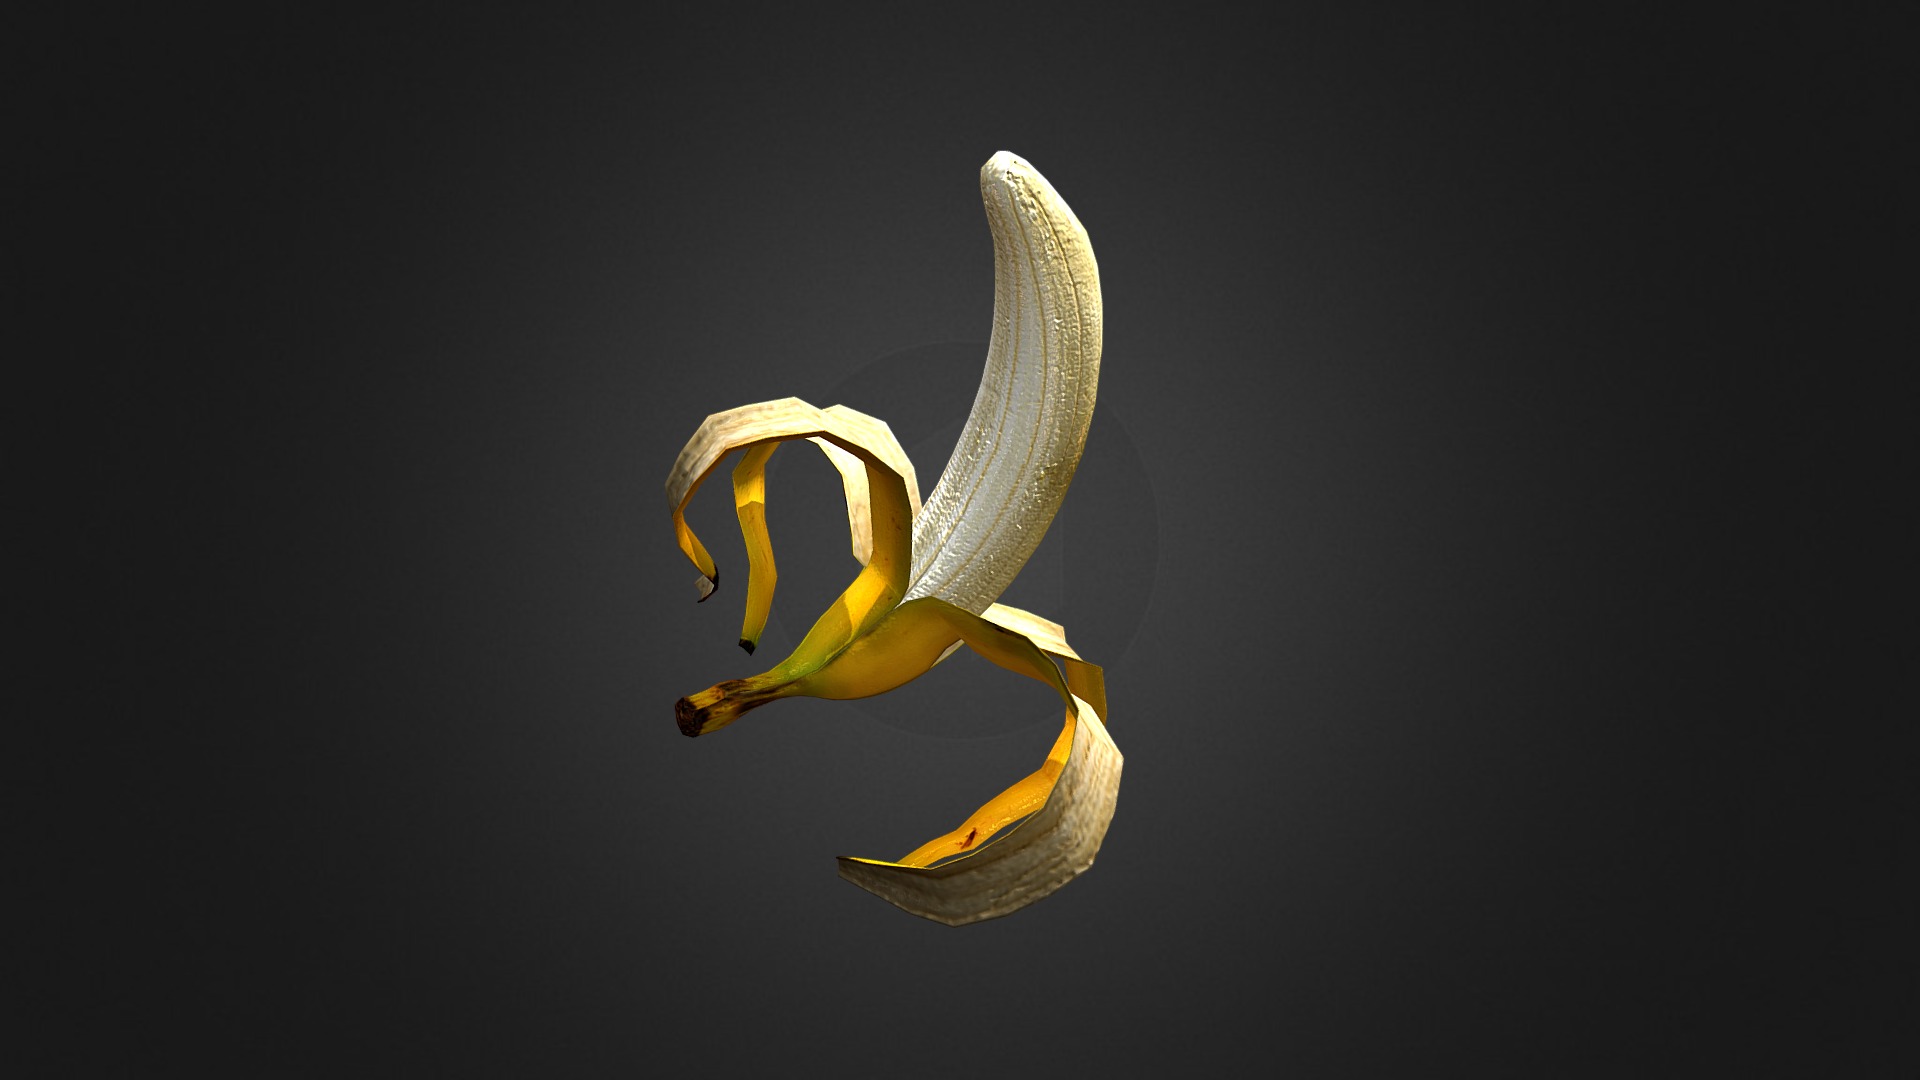 3D model Banana Rig - This is a 3D model of the Banana Rig. The 3D model is about a banana with a yellow peel.